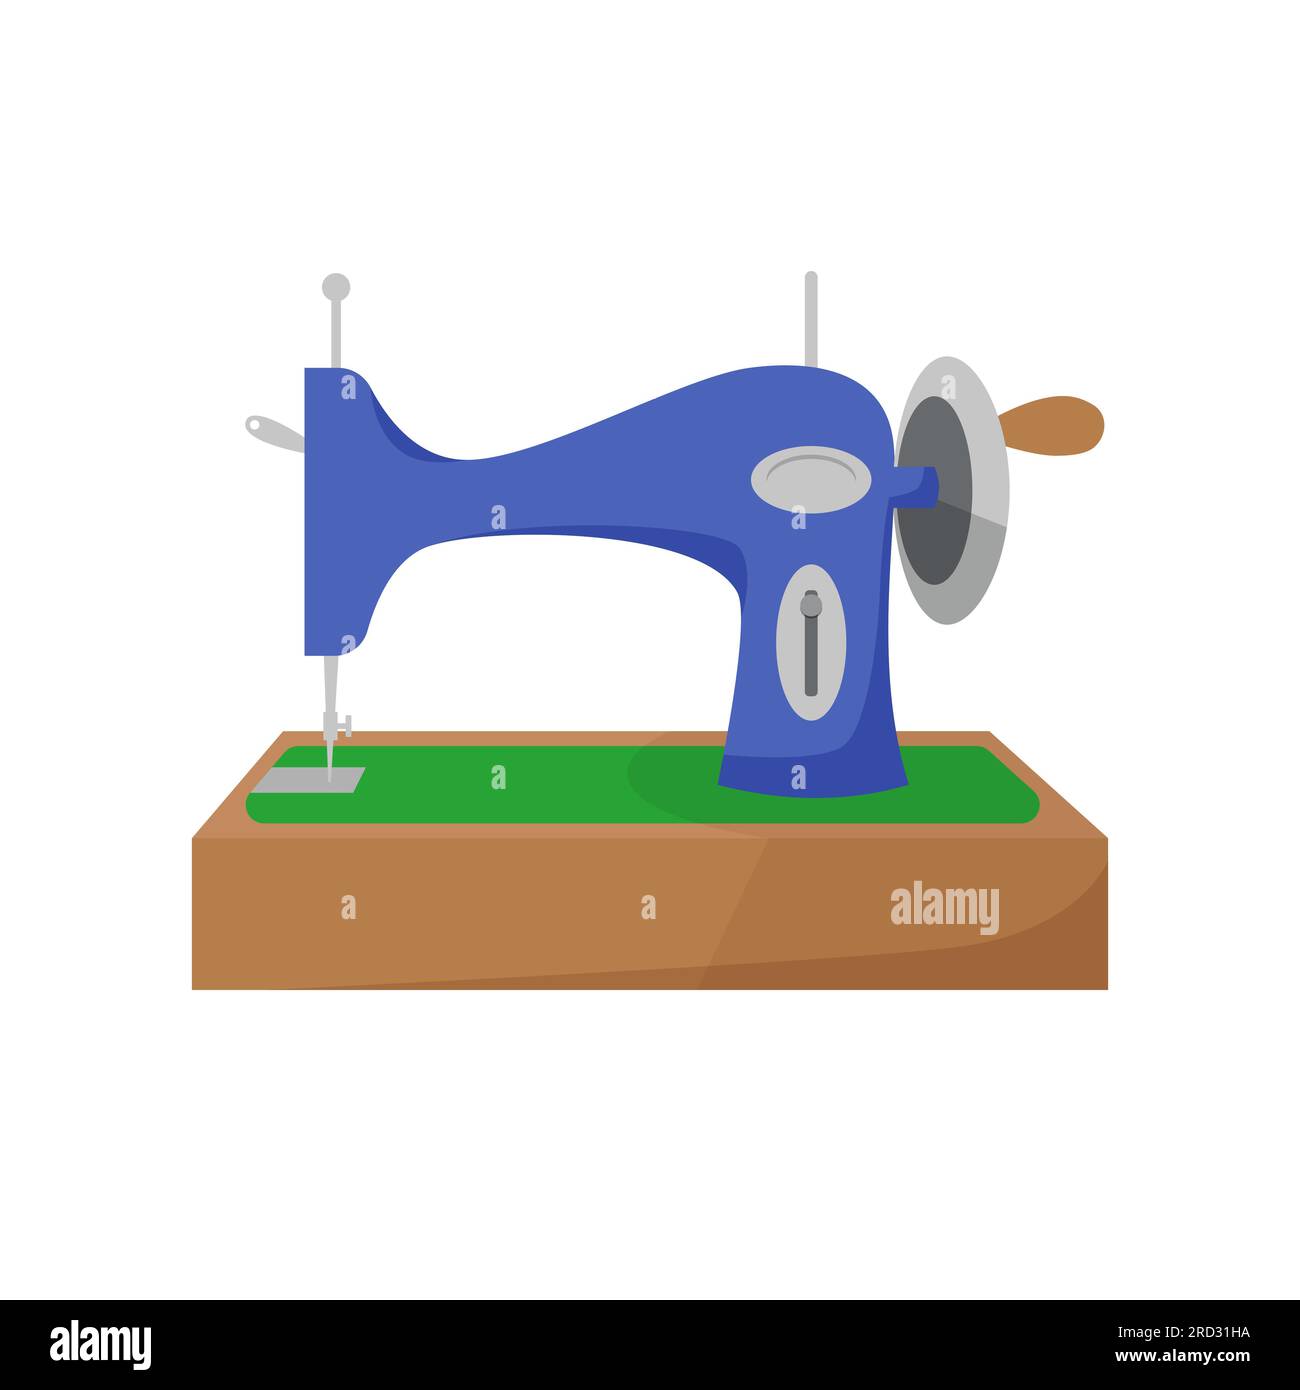 Sewing machine and craft supplies. Stock Vector by ©masha_tace 64599877